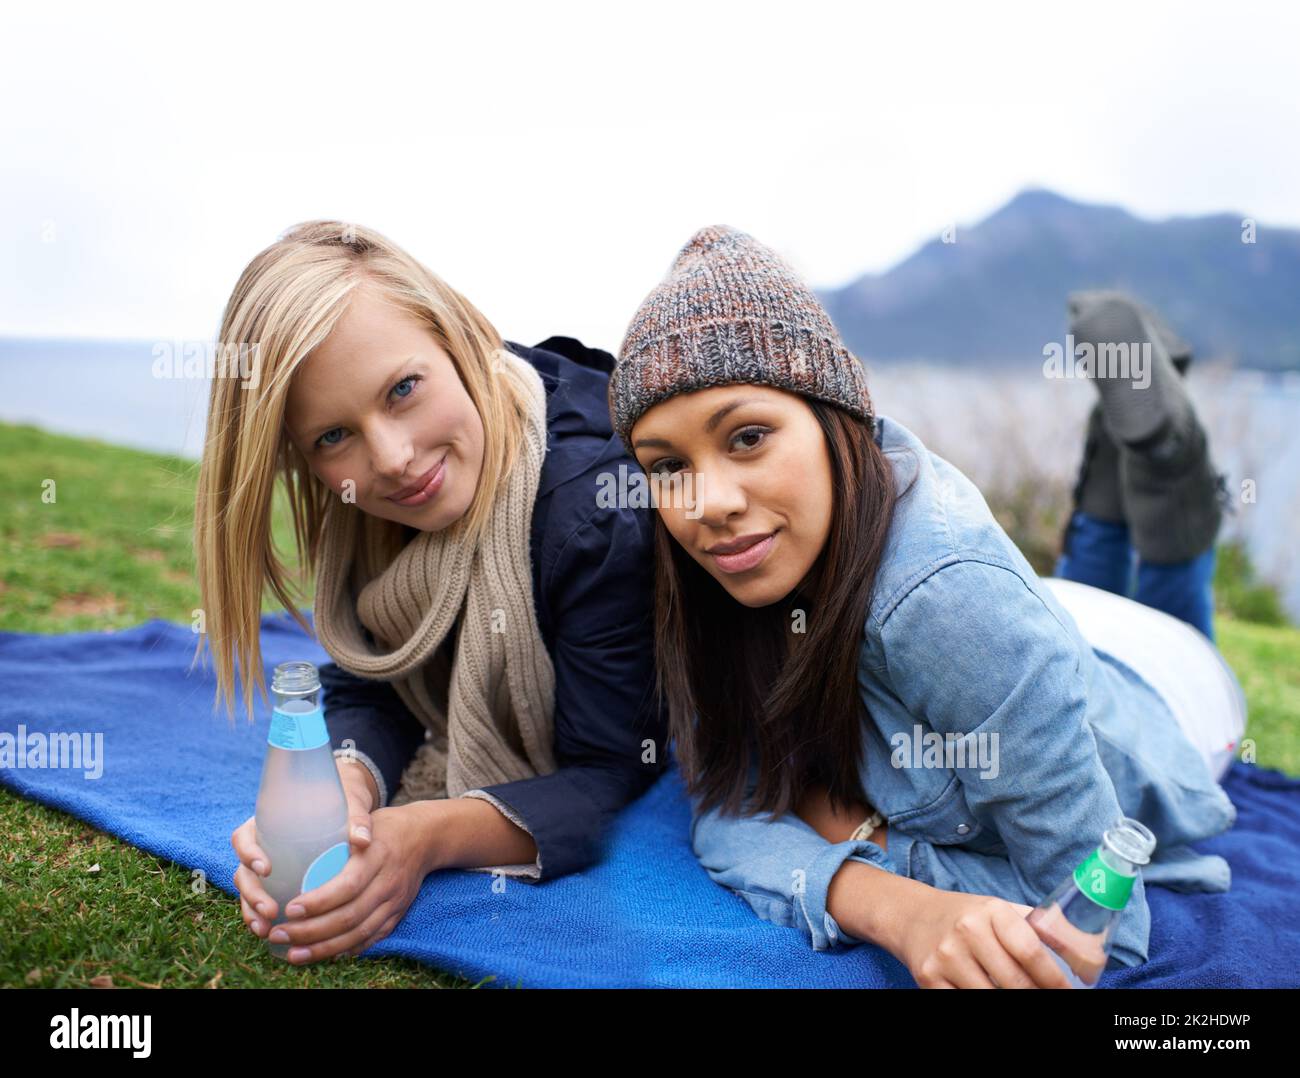 Leisure time with my best friend. Two young women smiling while lying on the lawn outside. Stock Photo